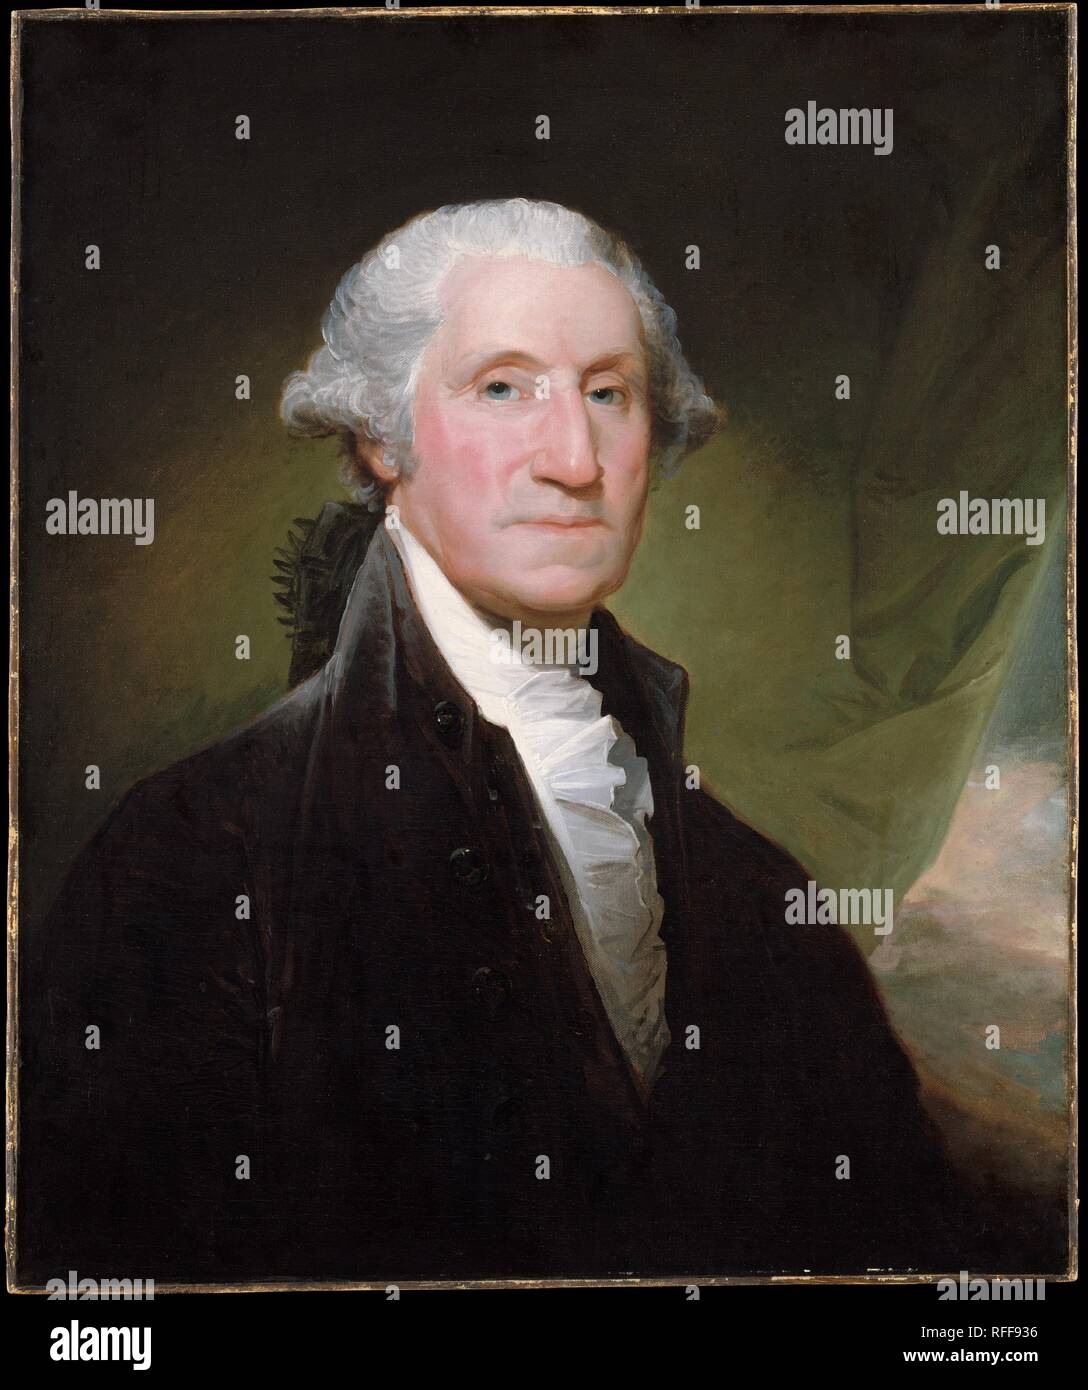 George Washington. Artist: Gilbert Stuart (American, North Kingston, Rhode Island 1755-1828 Boston, Massachusetts). Dimensions: 30 1/4 x 25 1/4 in. (76.8 x 64.1 cm). Date: begun 1795.  This portrait of President Washington, called the Gibbs-Channing-Avery portrait, is one of eighteen similar works known as the Vaughan group. The first of this type, presumably painted from life and then copied in all the others, originally belonged to Samuel Vaughan, a London merchant living in Philadelphia and a close friend of Washington. This original portrait by Stuart, painted in 1795 according to Rembrand Stock Photo